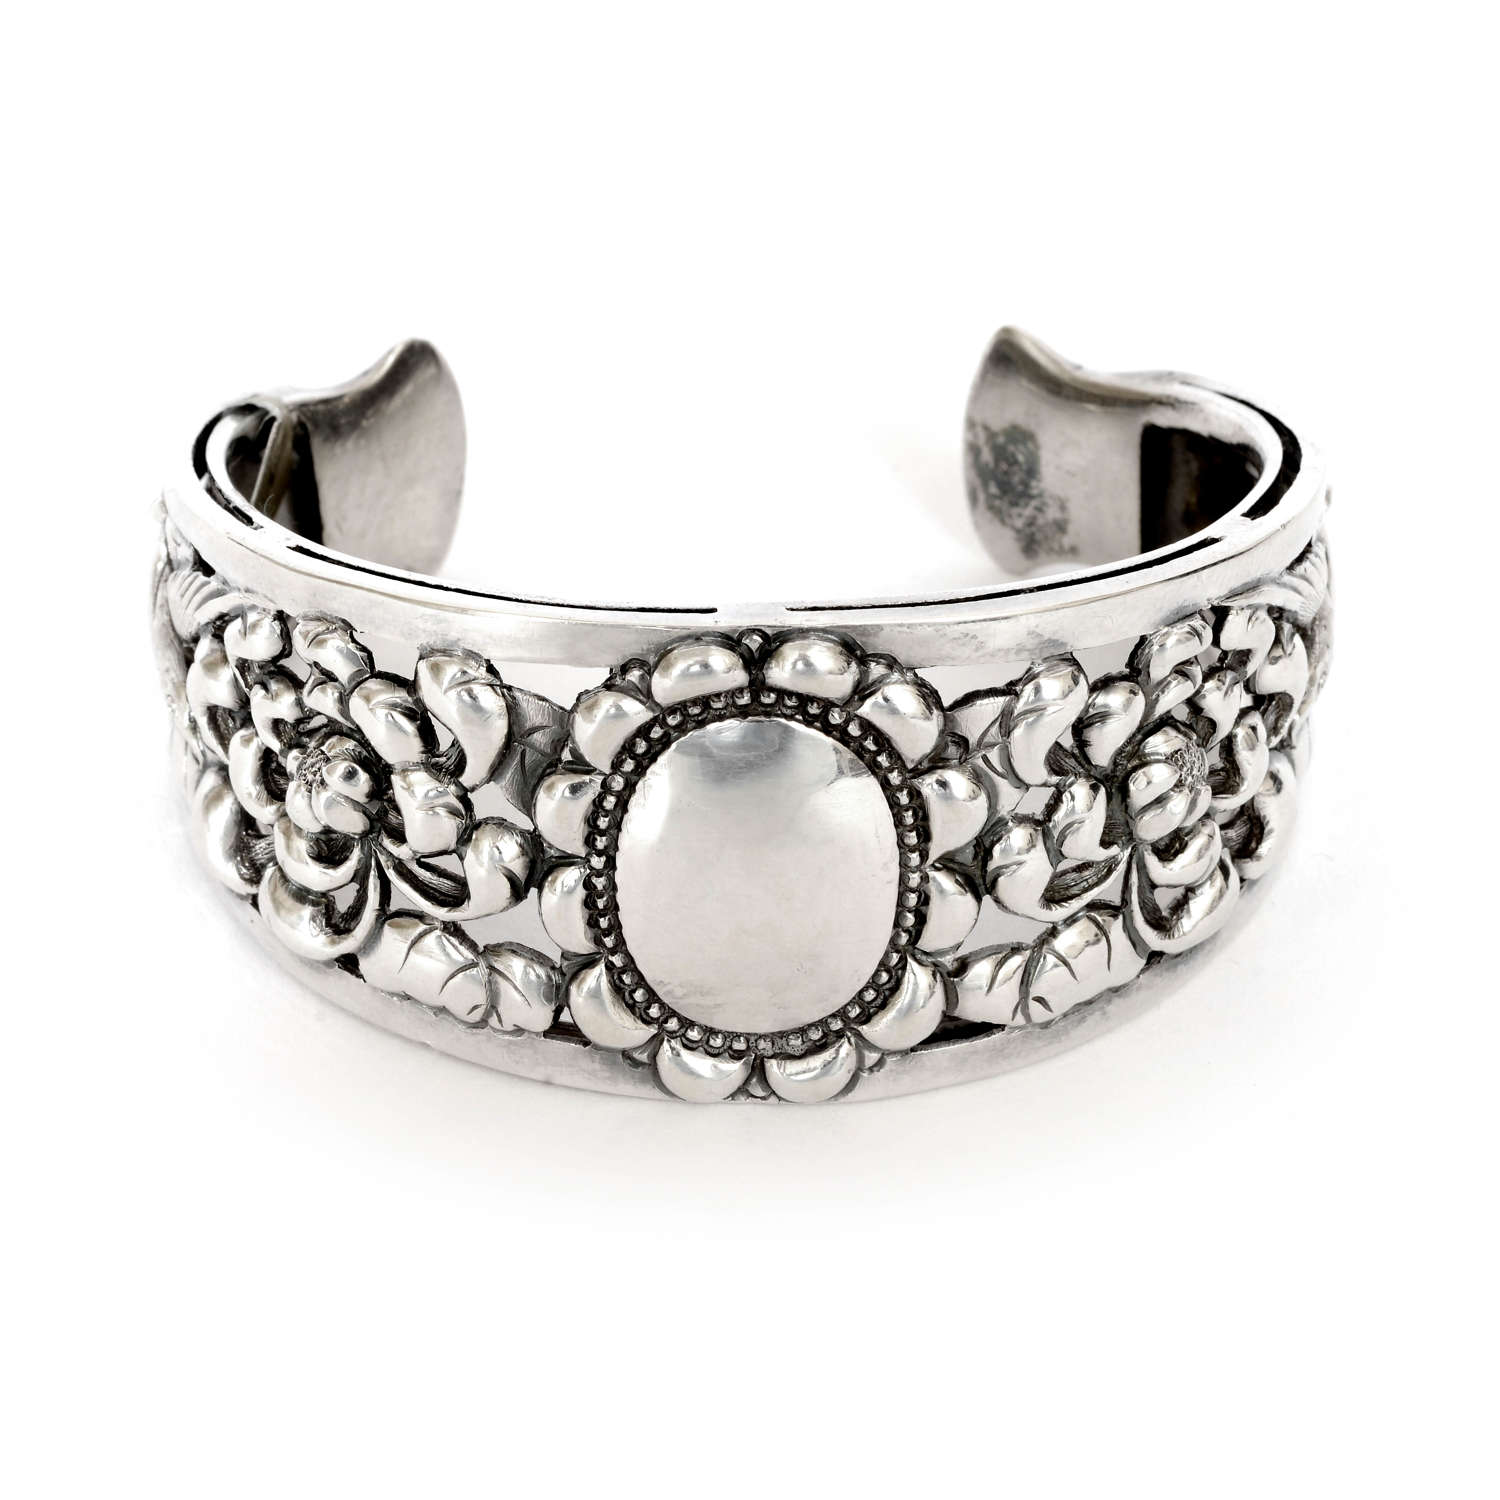 A Victorian silver cuff with birds and flowers.